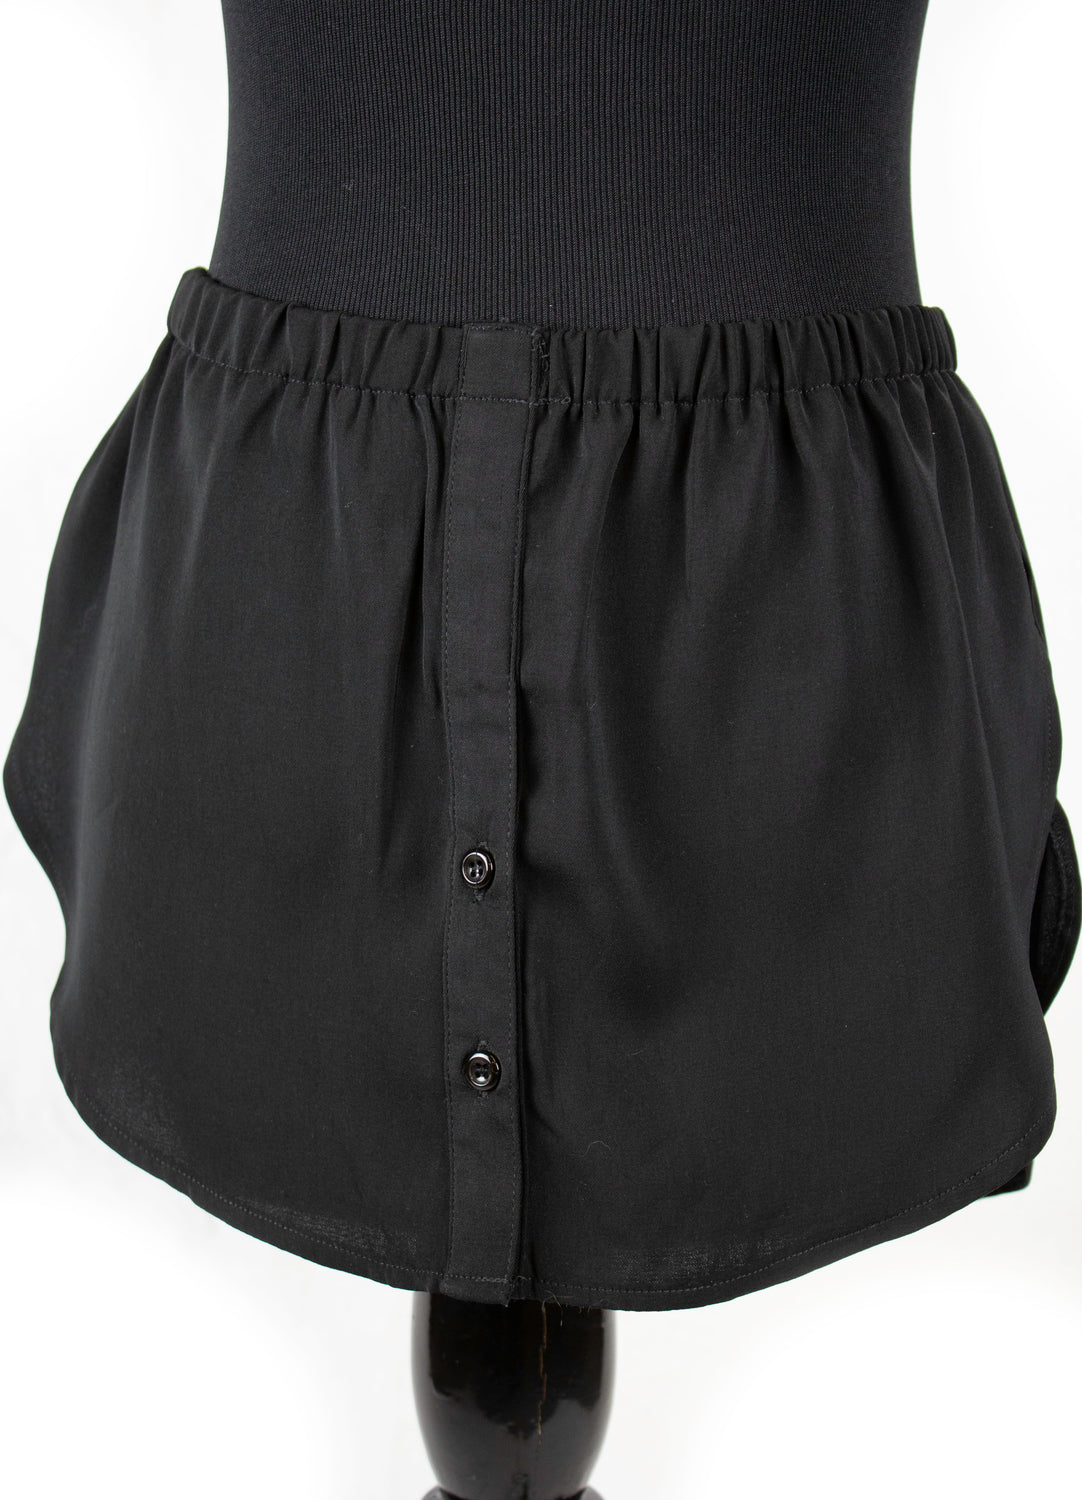 fake shirt extender in black with buttons and an elastic waistband